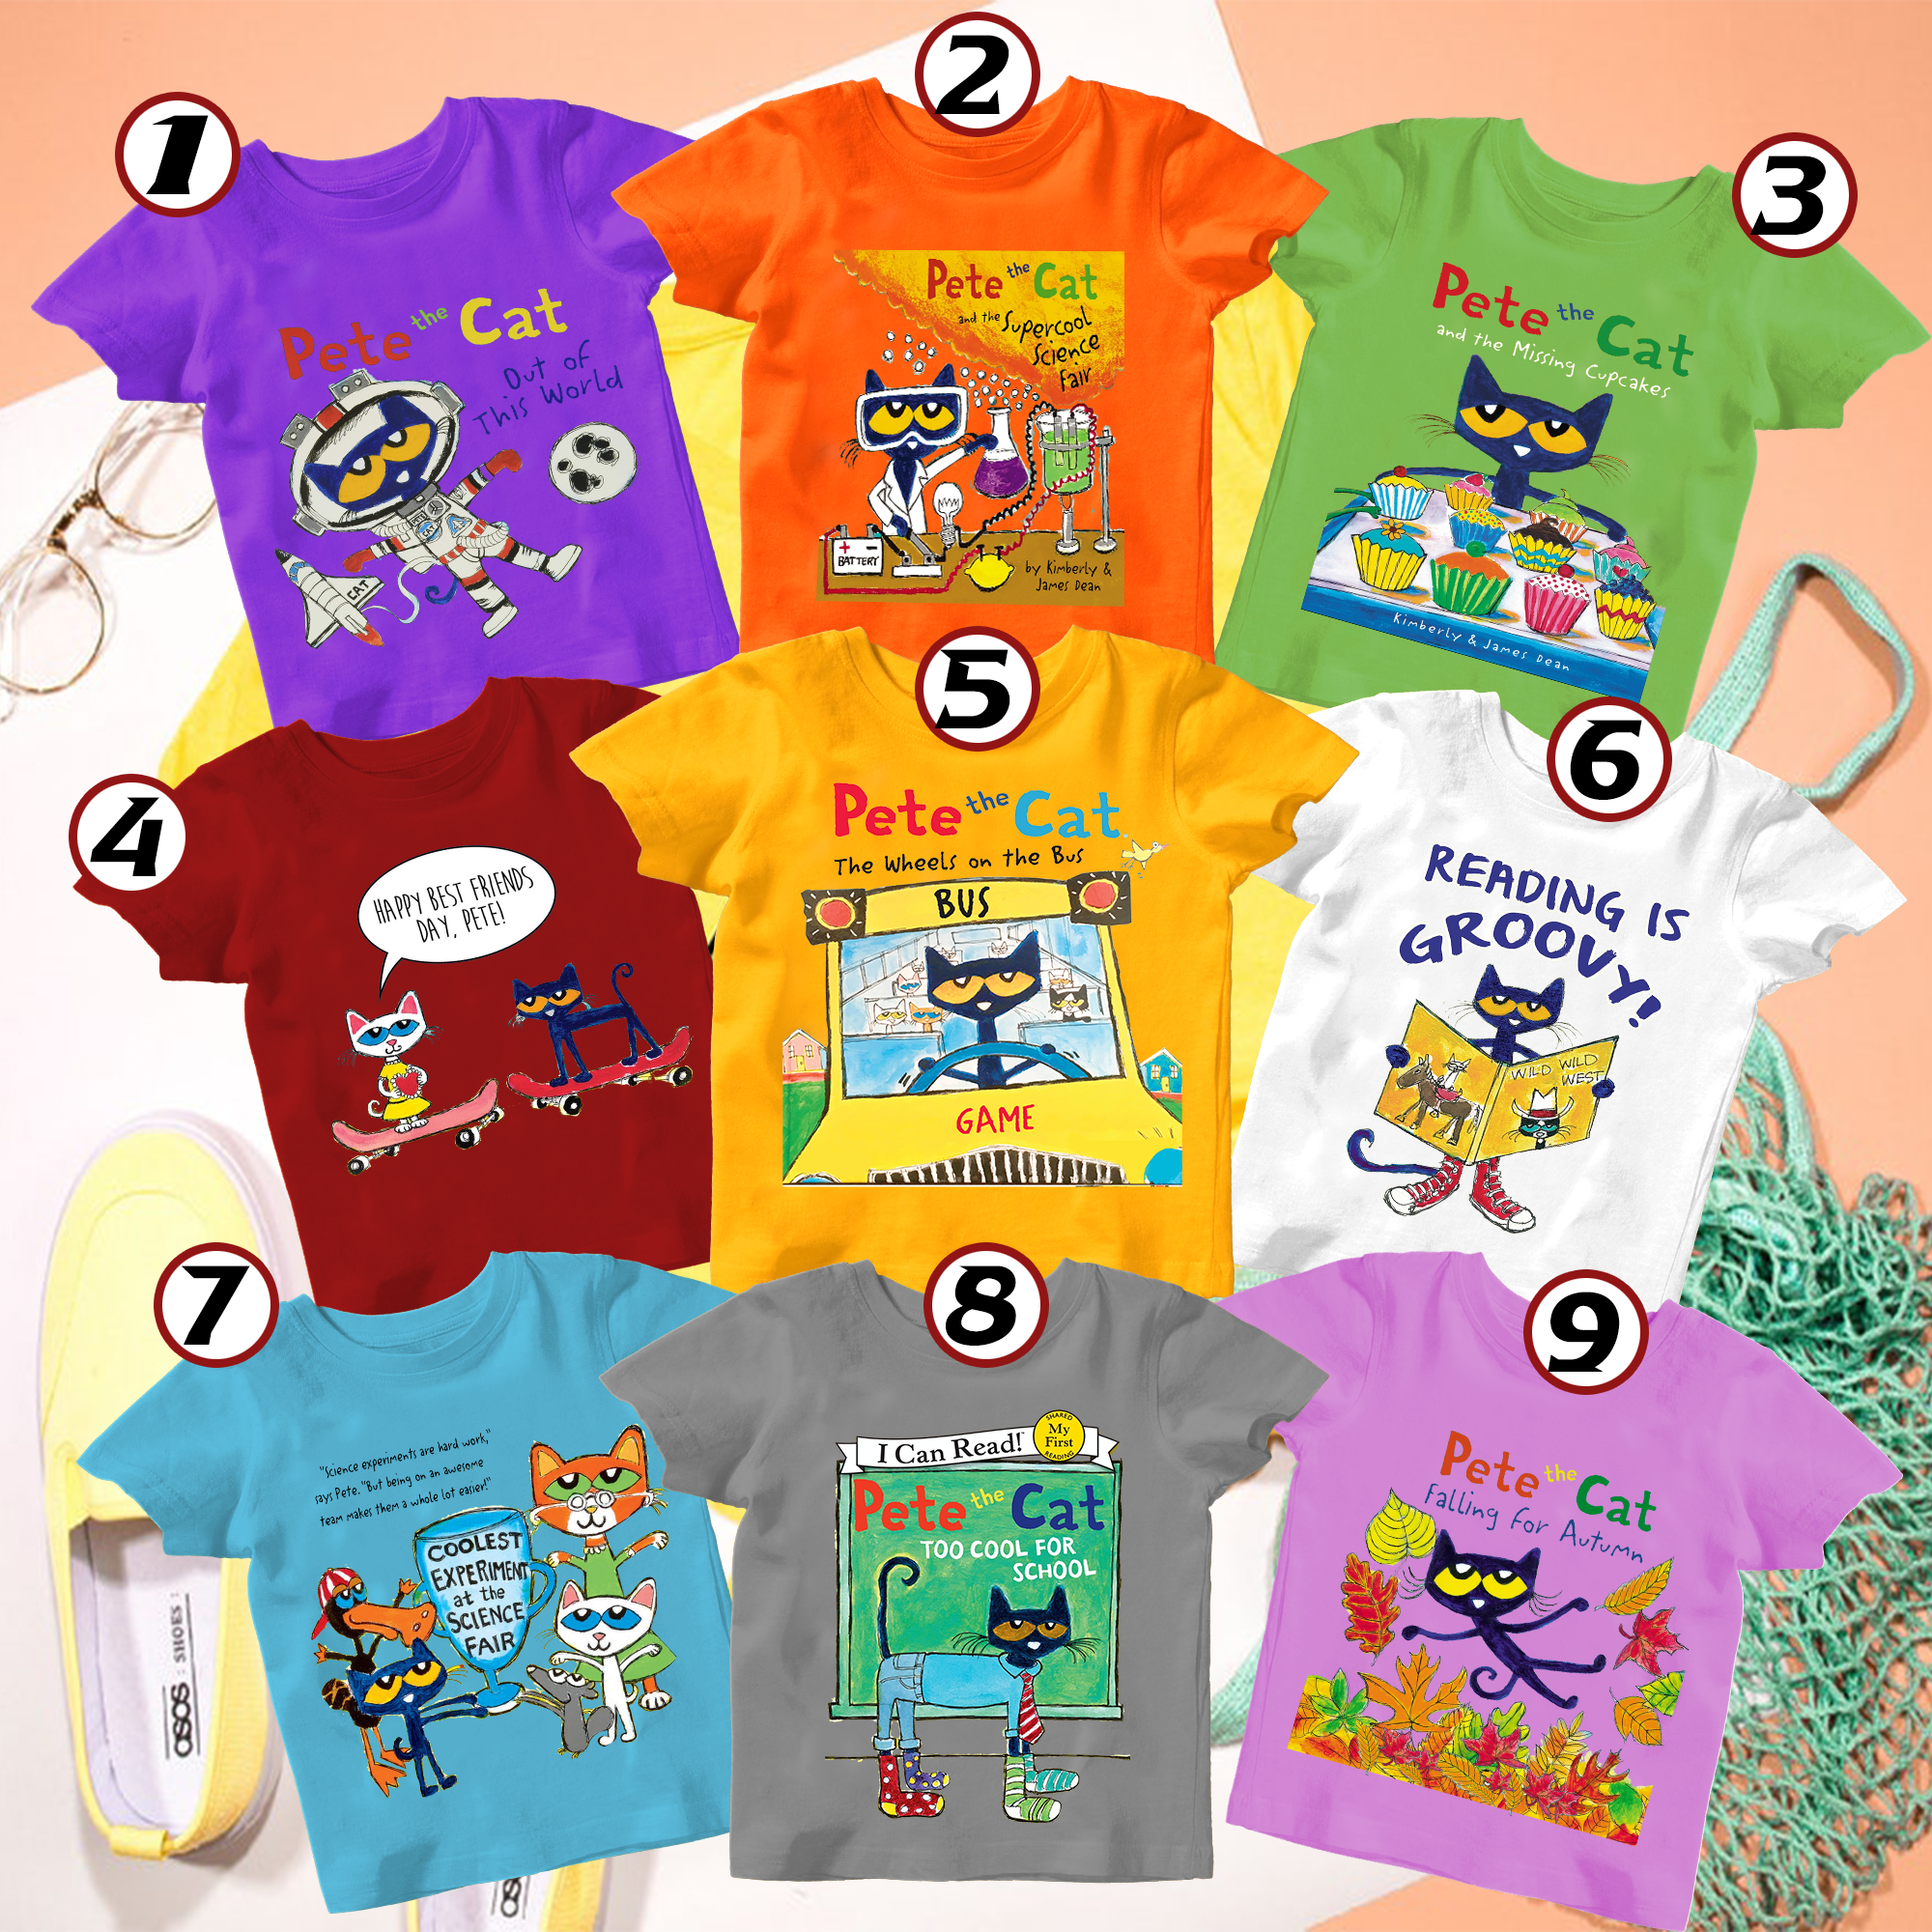 Pete The Cat Shirt, Pete The Cat Reading Book, Pete The Cat Too Cool For School, Pete the Cat Out of This World, Pete the Cat Fan Gift, Pete the Cat Lover